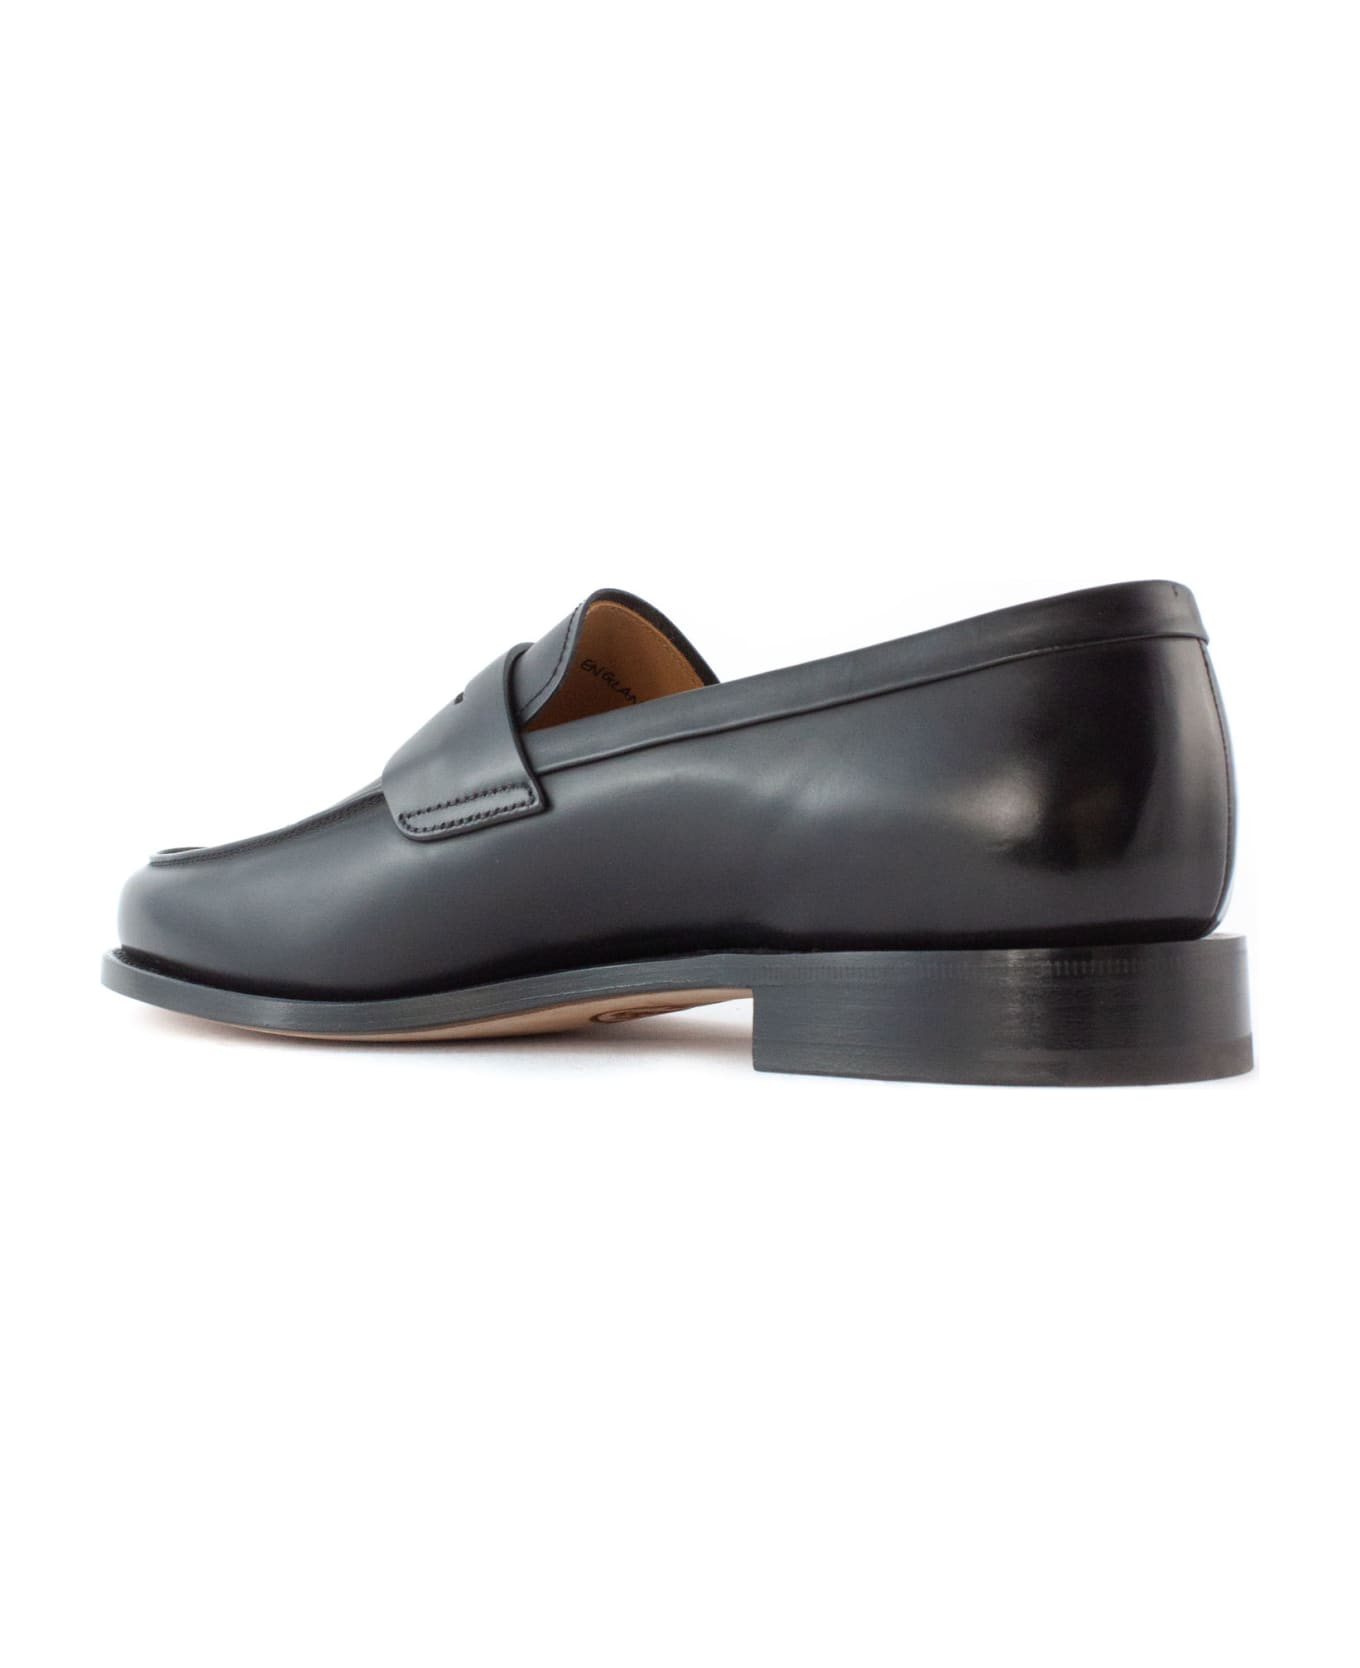 Church's Loafer In Black Leather - Black